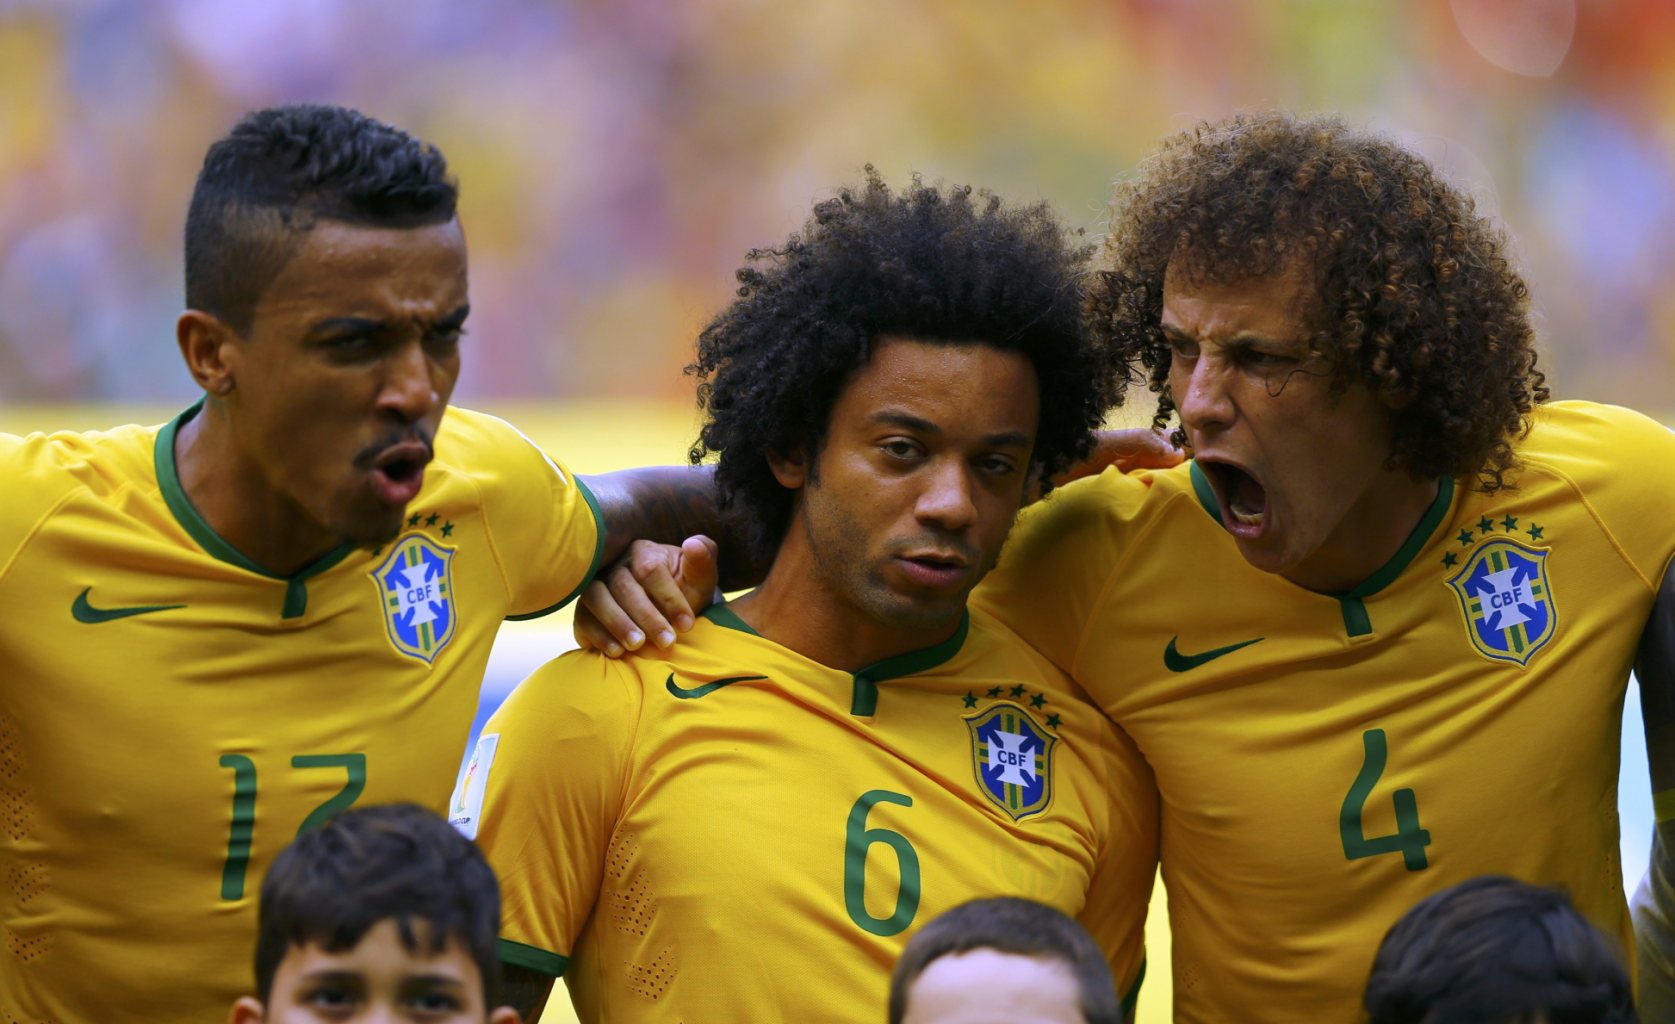 David Luiz all pumped up during the Brazilian National Anthem at the FIFA World Cup 2014